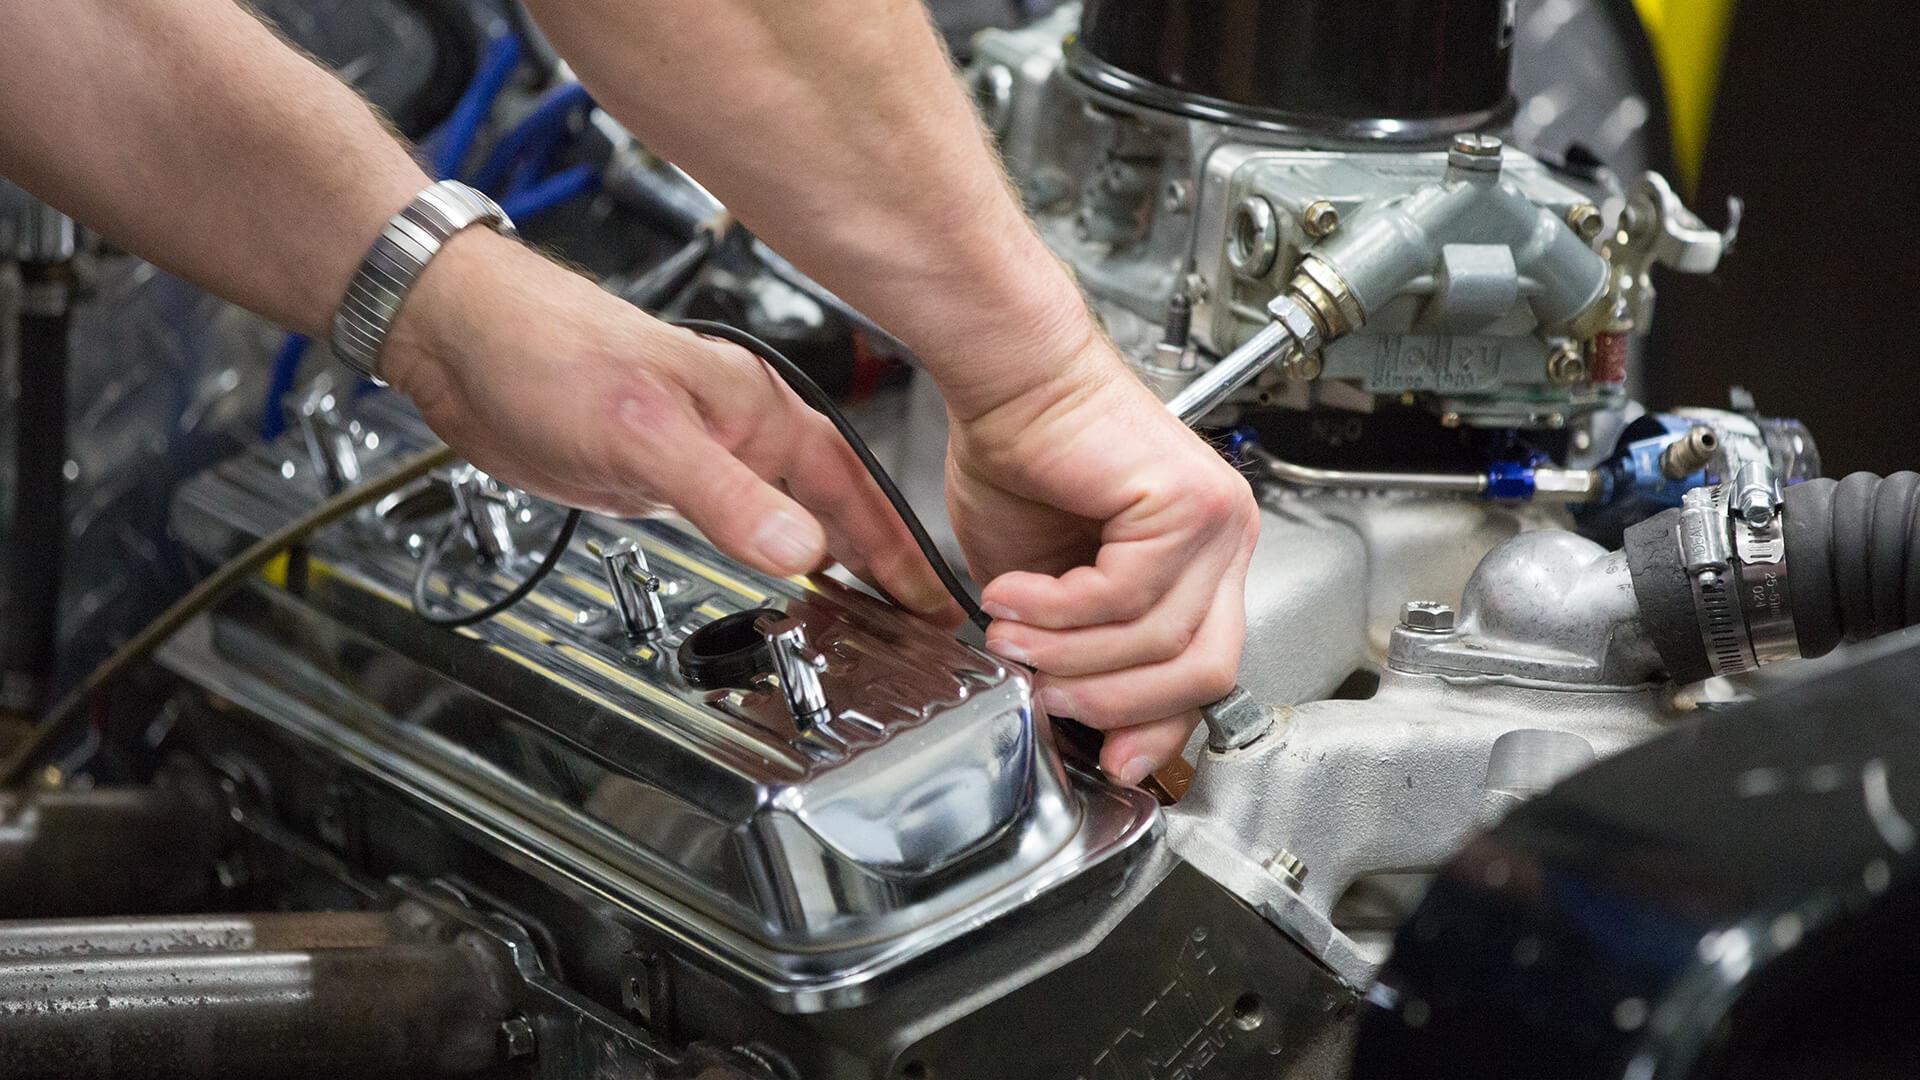 Students hands working on an engine